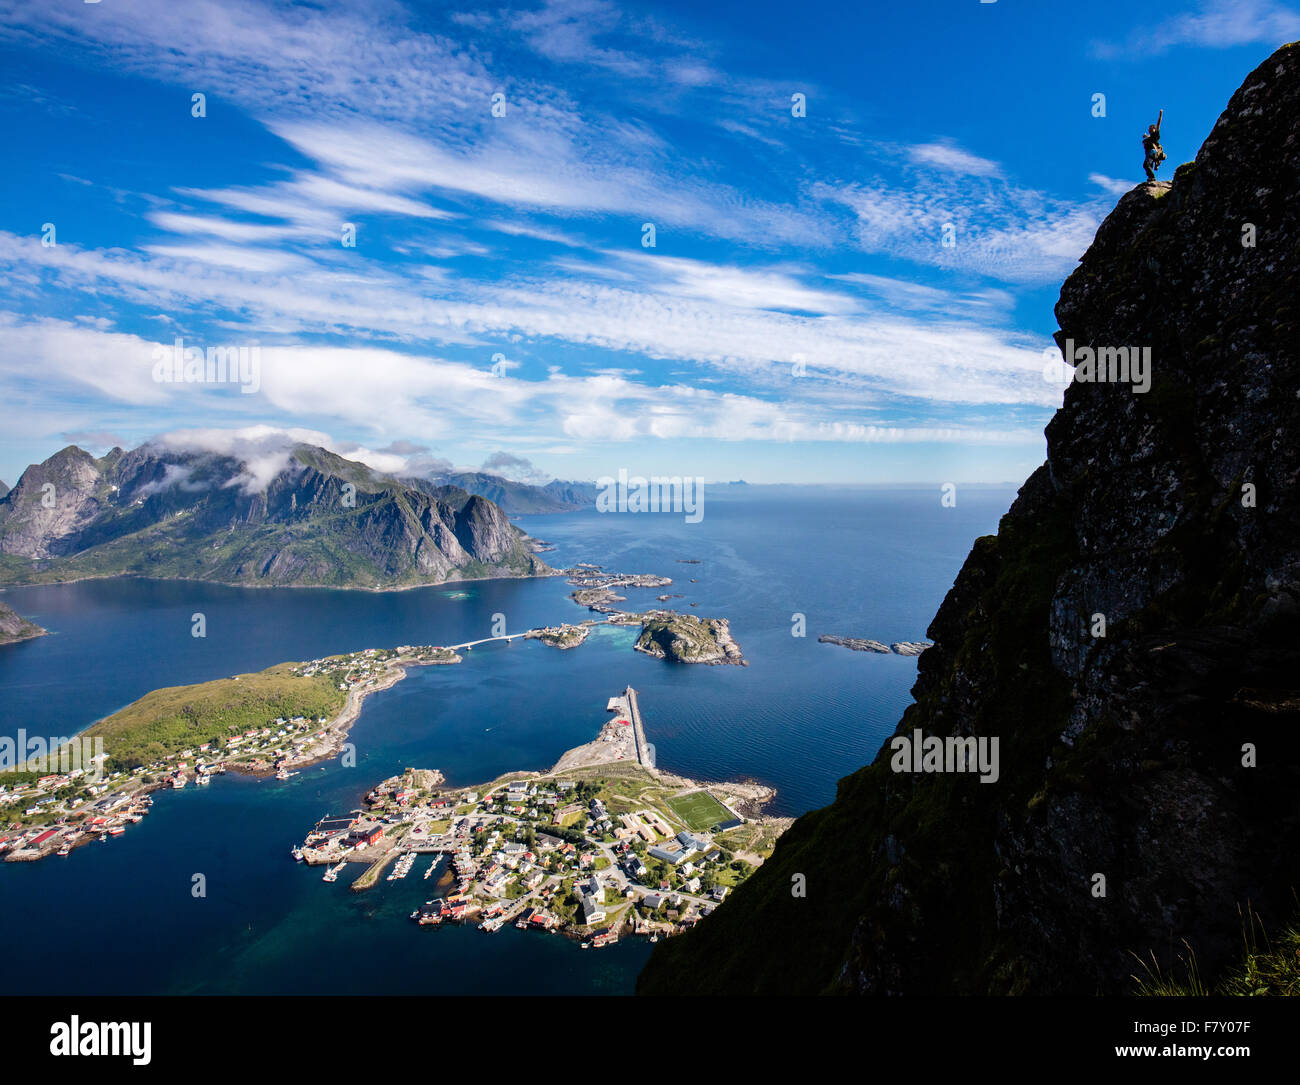 A climber hails the view and celebrates his ascent to the summit of Reinebringen above Reine = western Lofoten Islands Norway Stock Photo